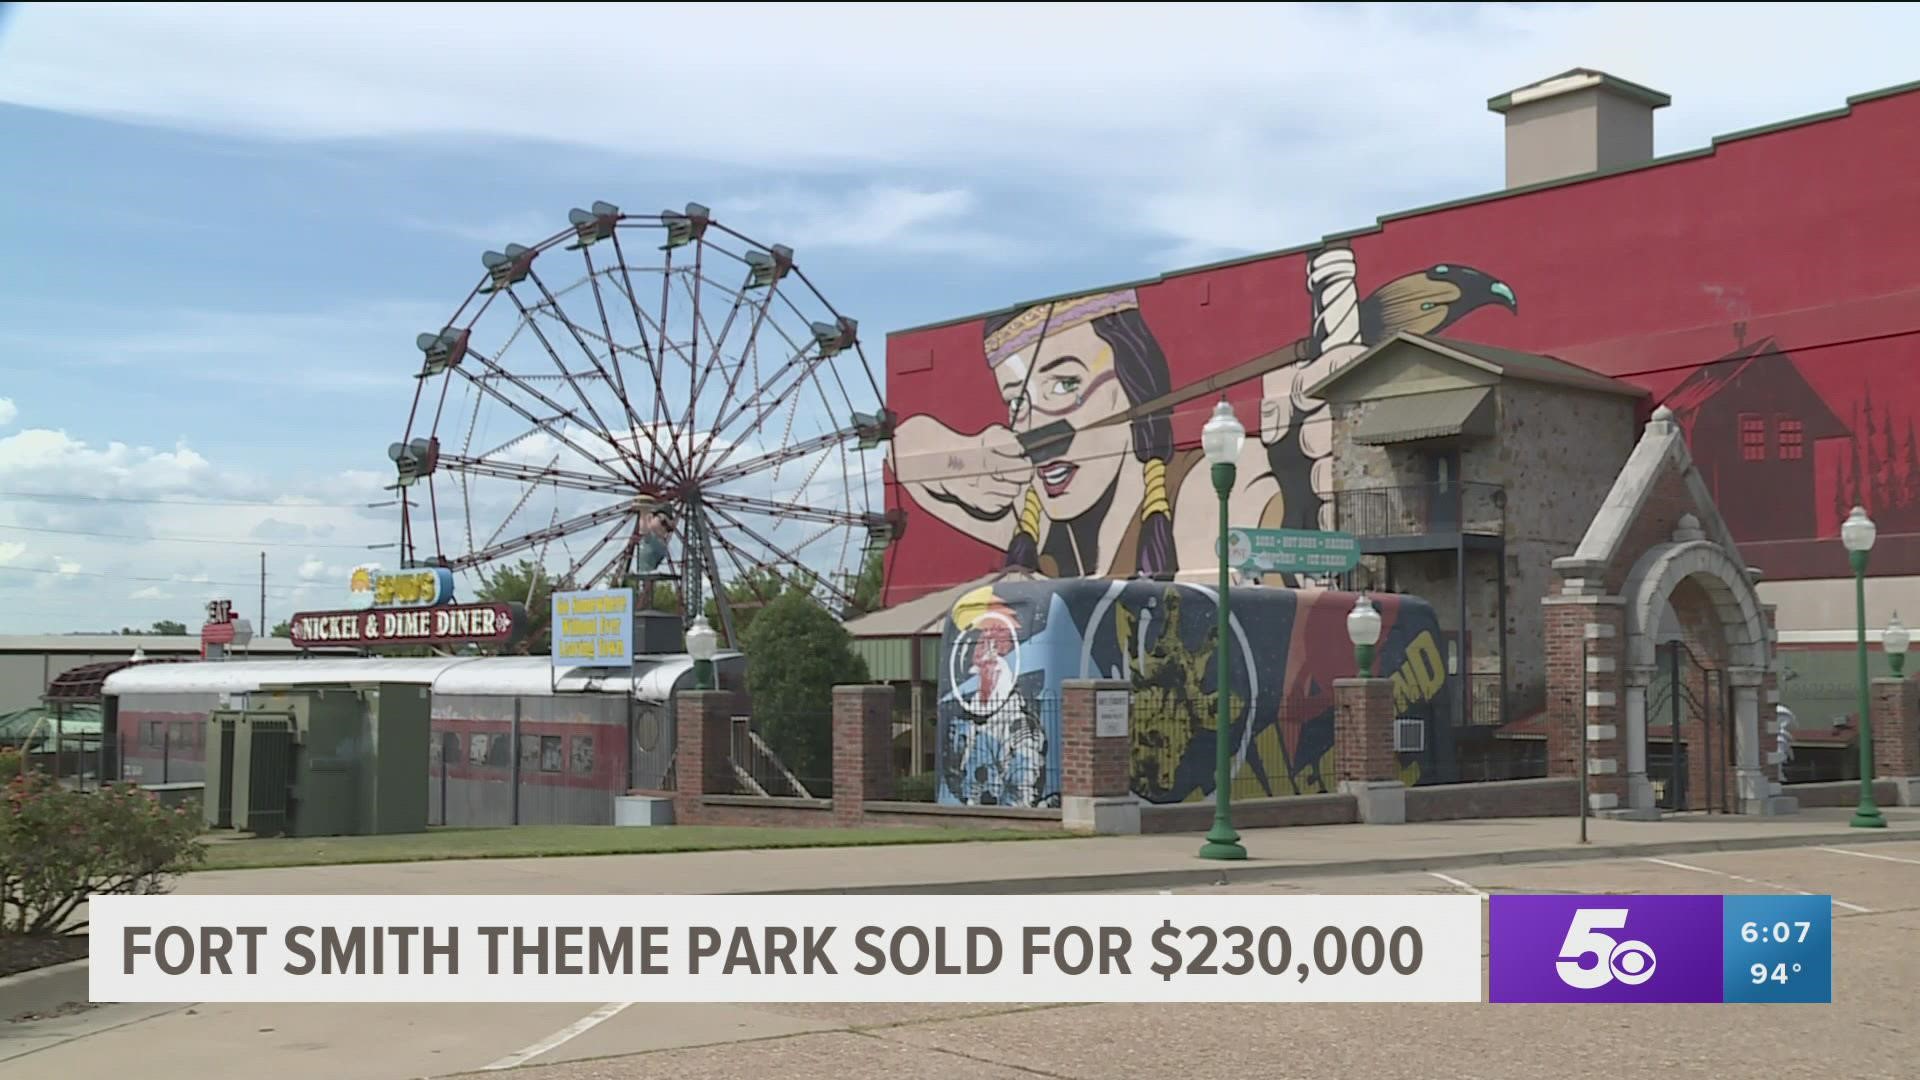 The park, known for its historic Ferris Wheel and carousel, was sold on Thursday.